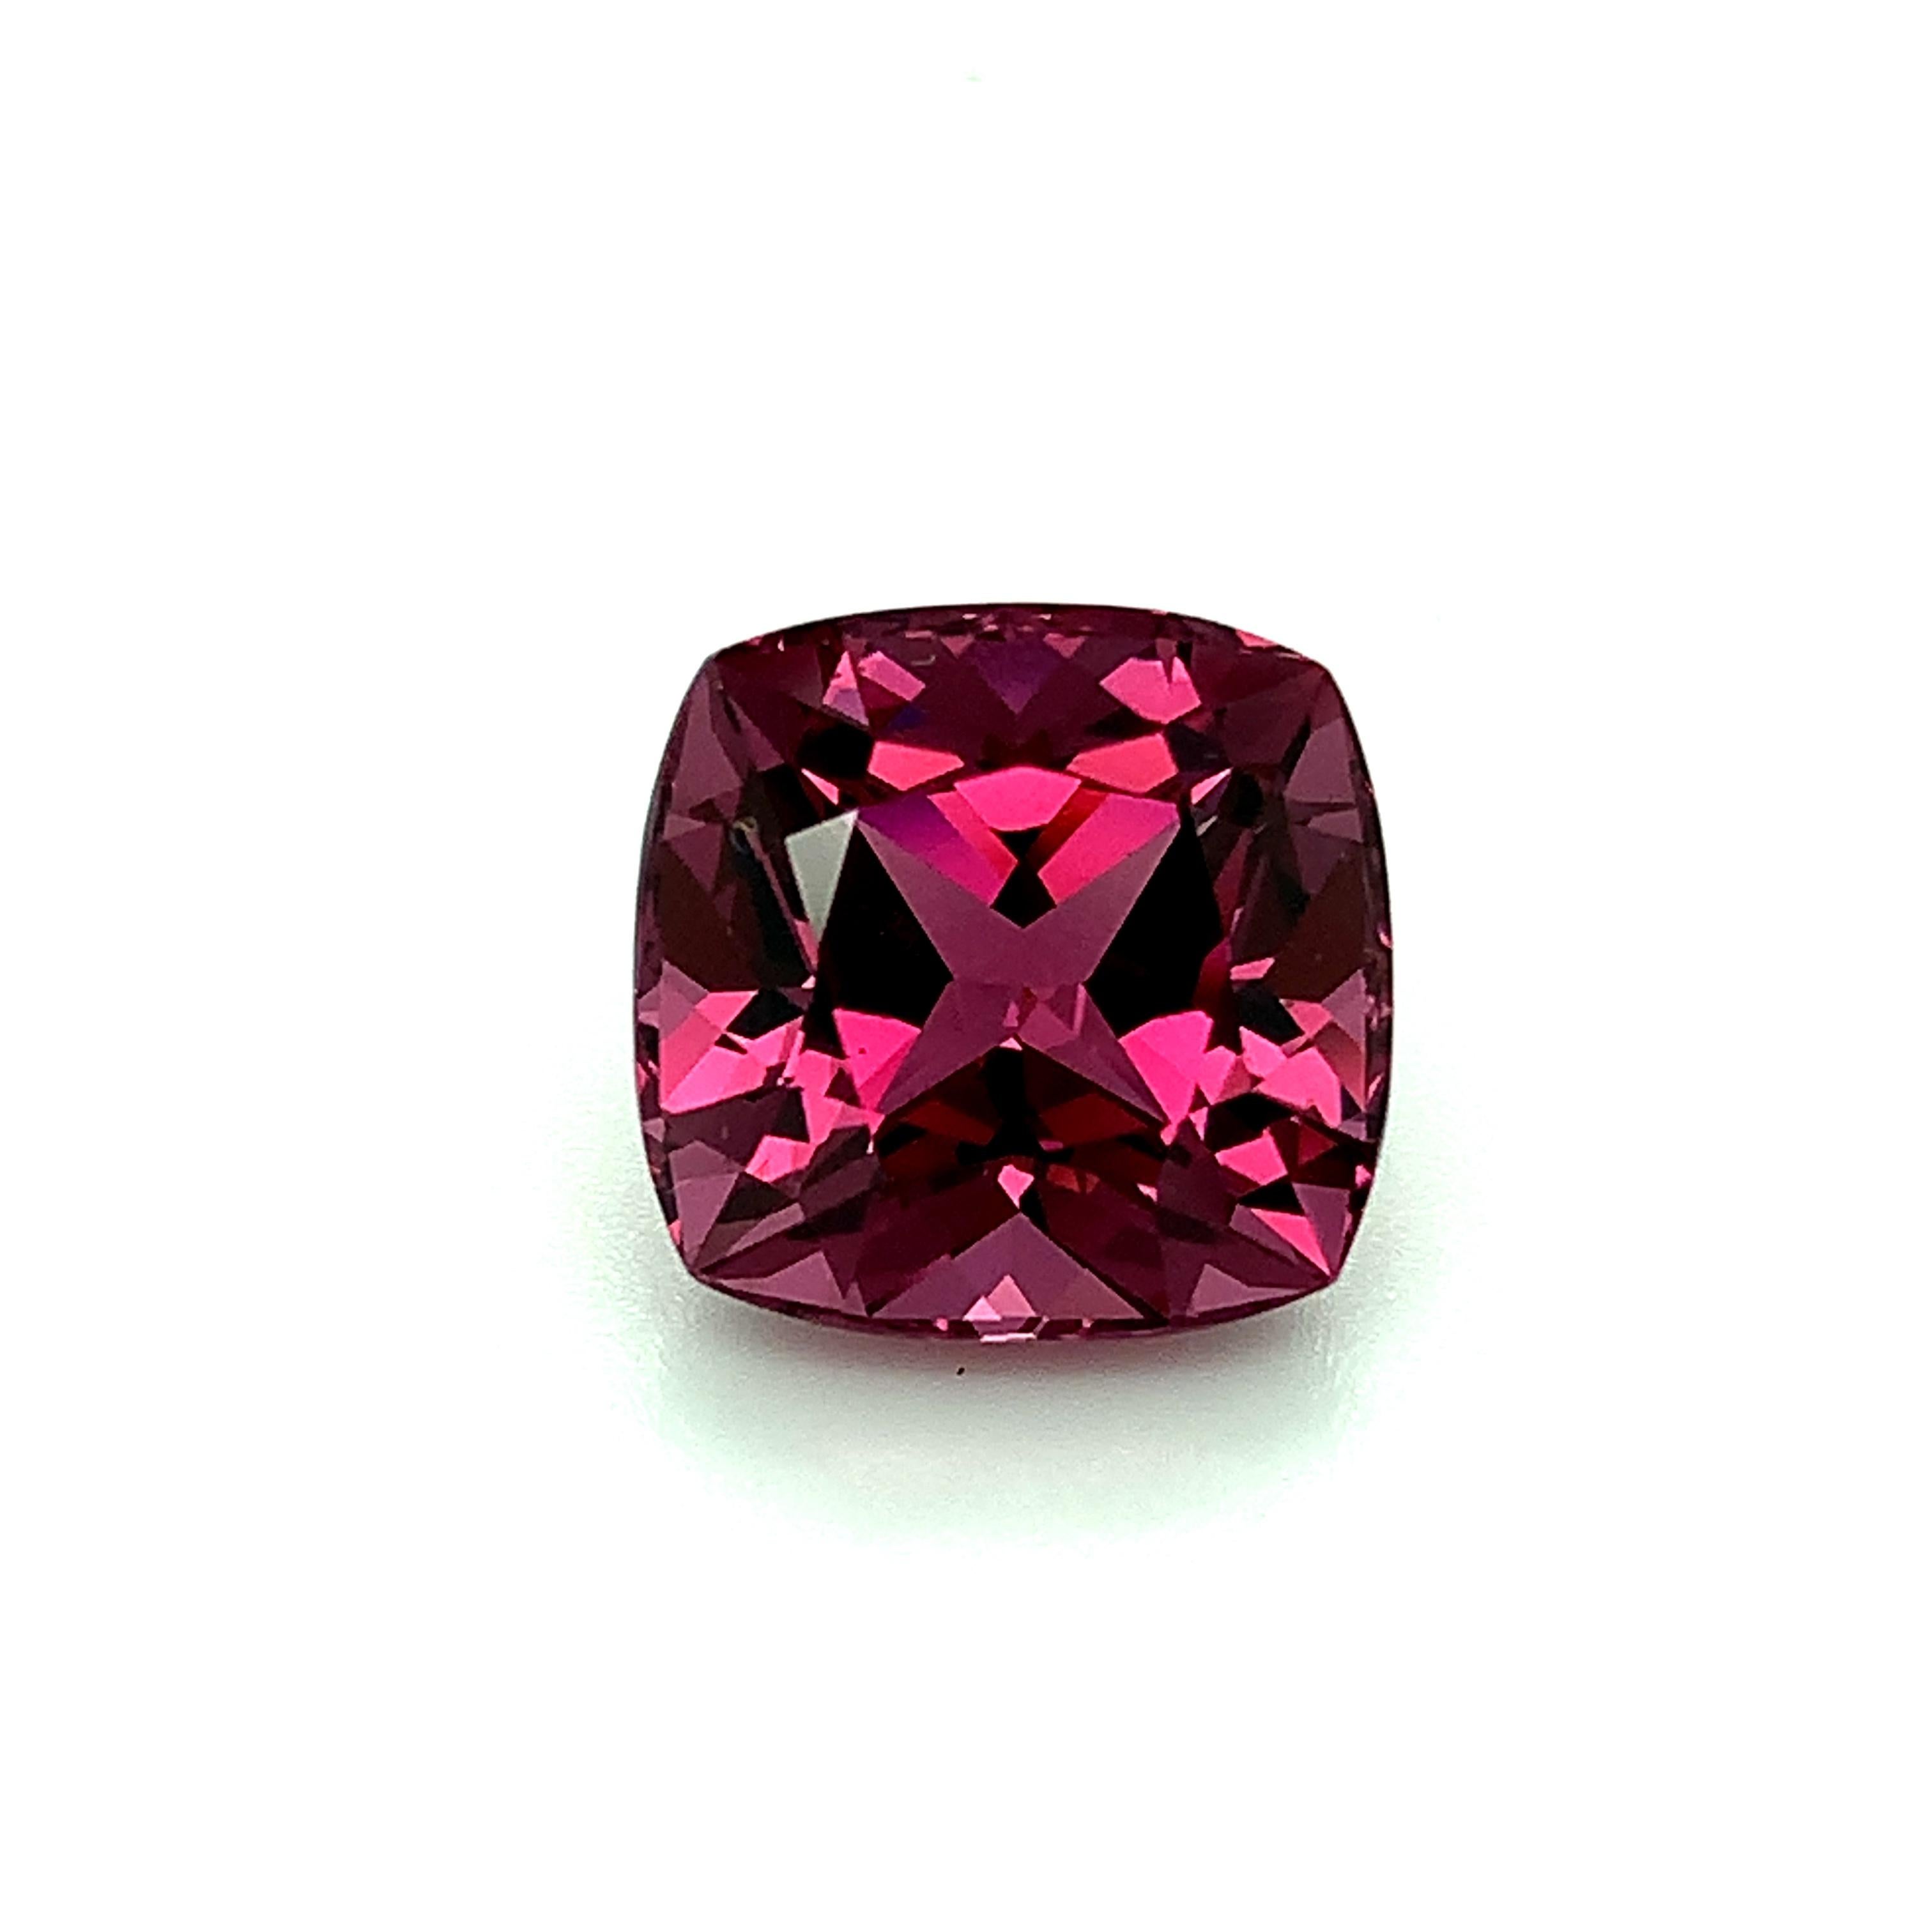 Unheated 9.26 Carat Purple Pink Spinel Cushion, Loose Gemstone, GIA Certified .A For Sale 4